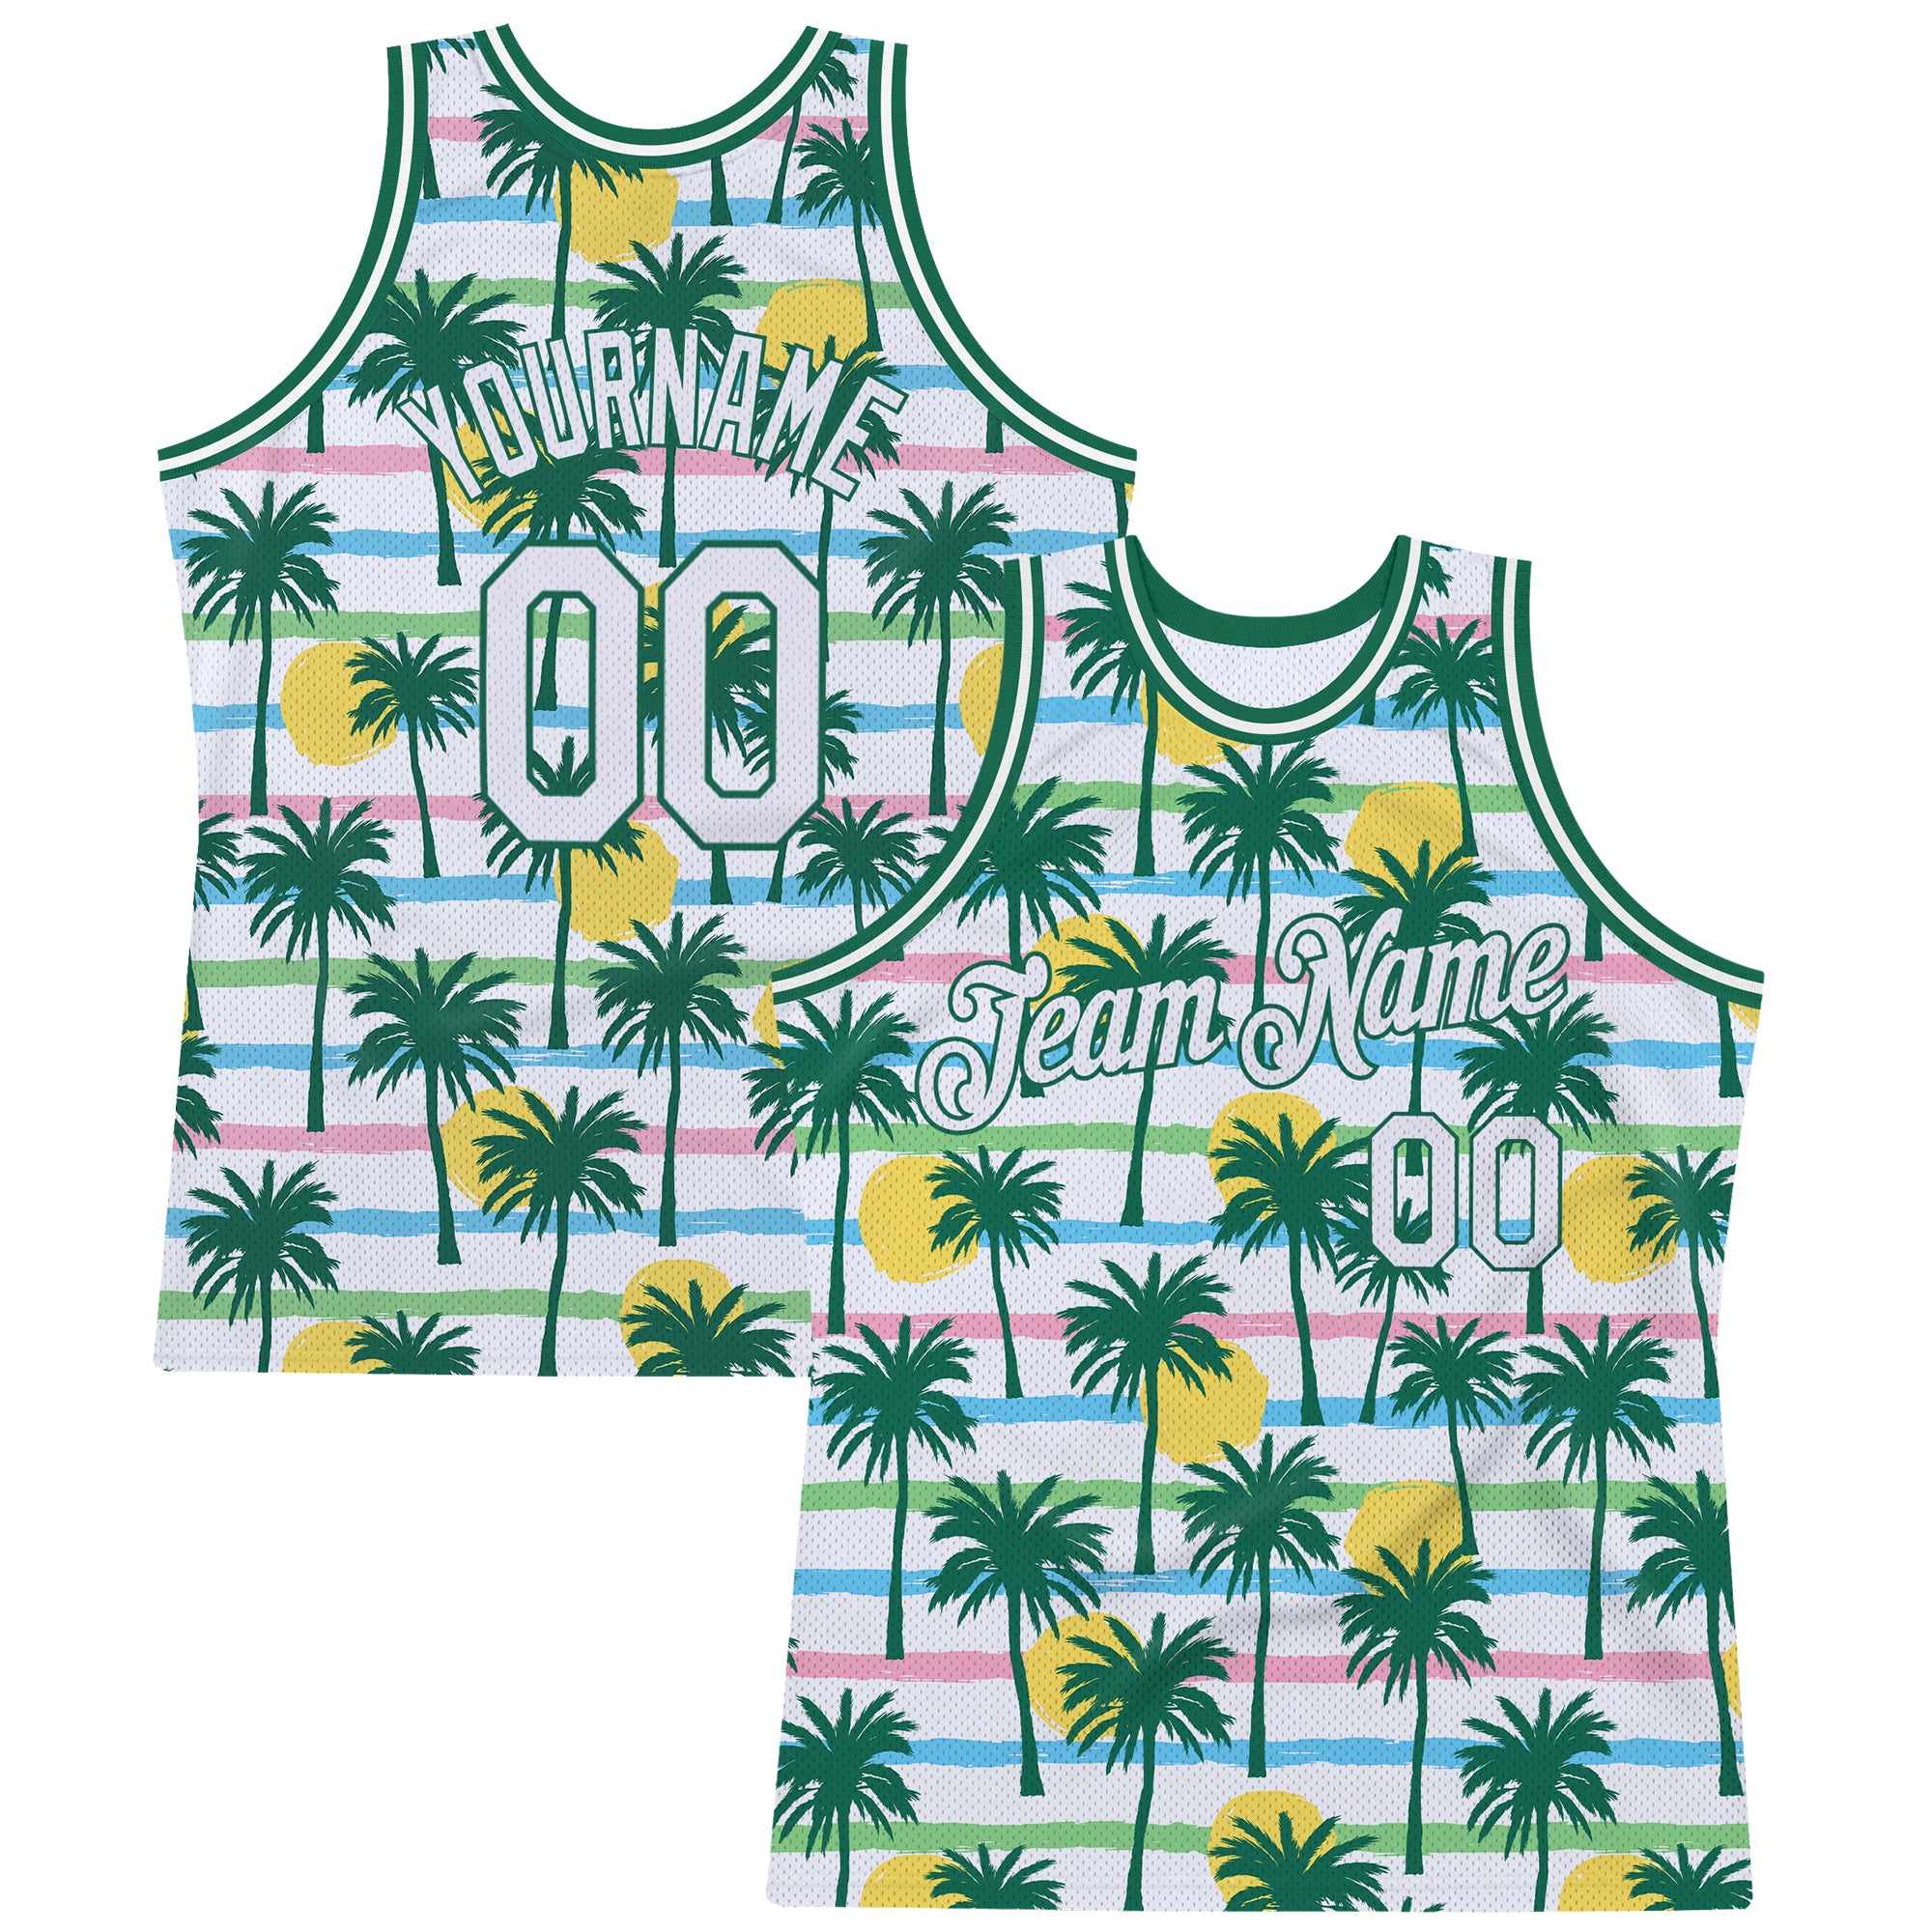 Custom Kelly Green Red-White 3D Mexico Watercolored Splashes Grunge Design  Authentic Basketball Jersey